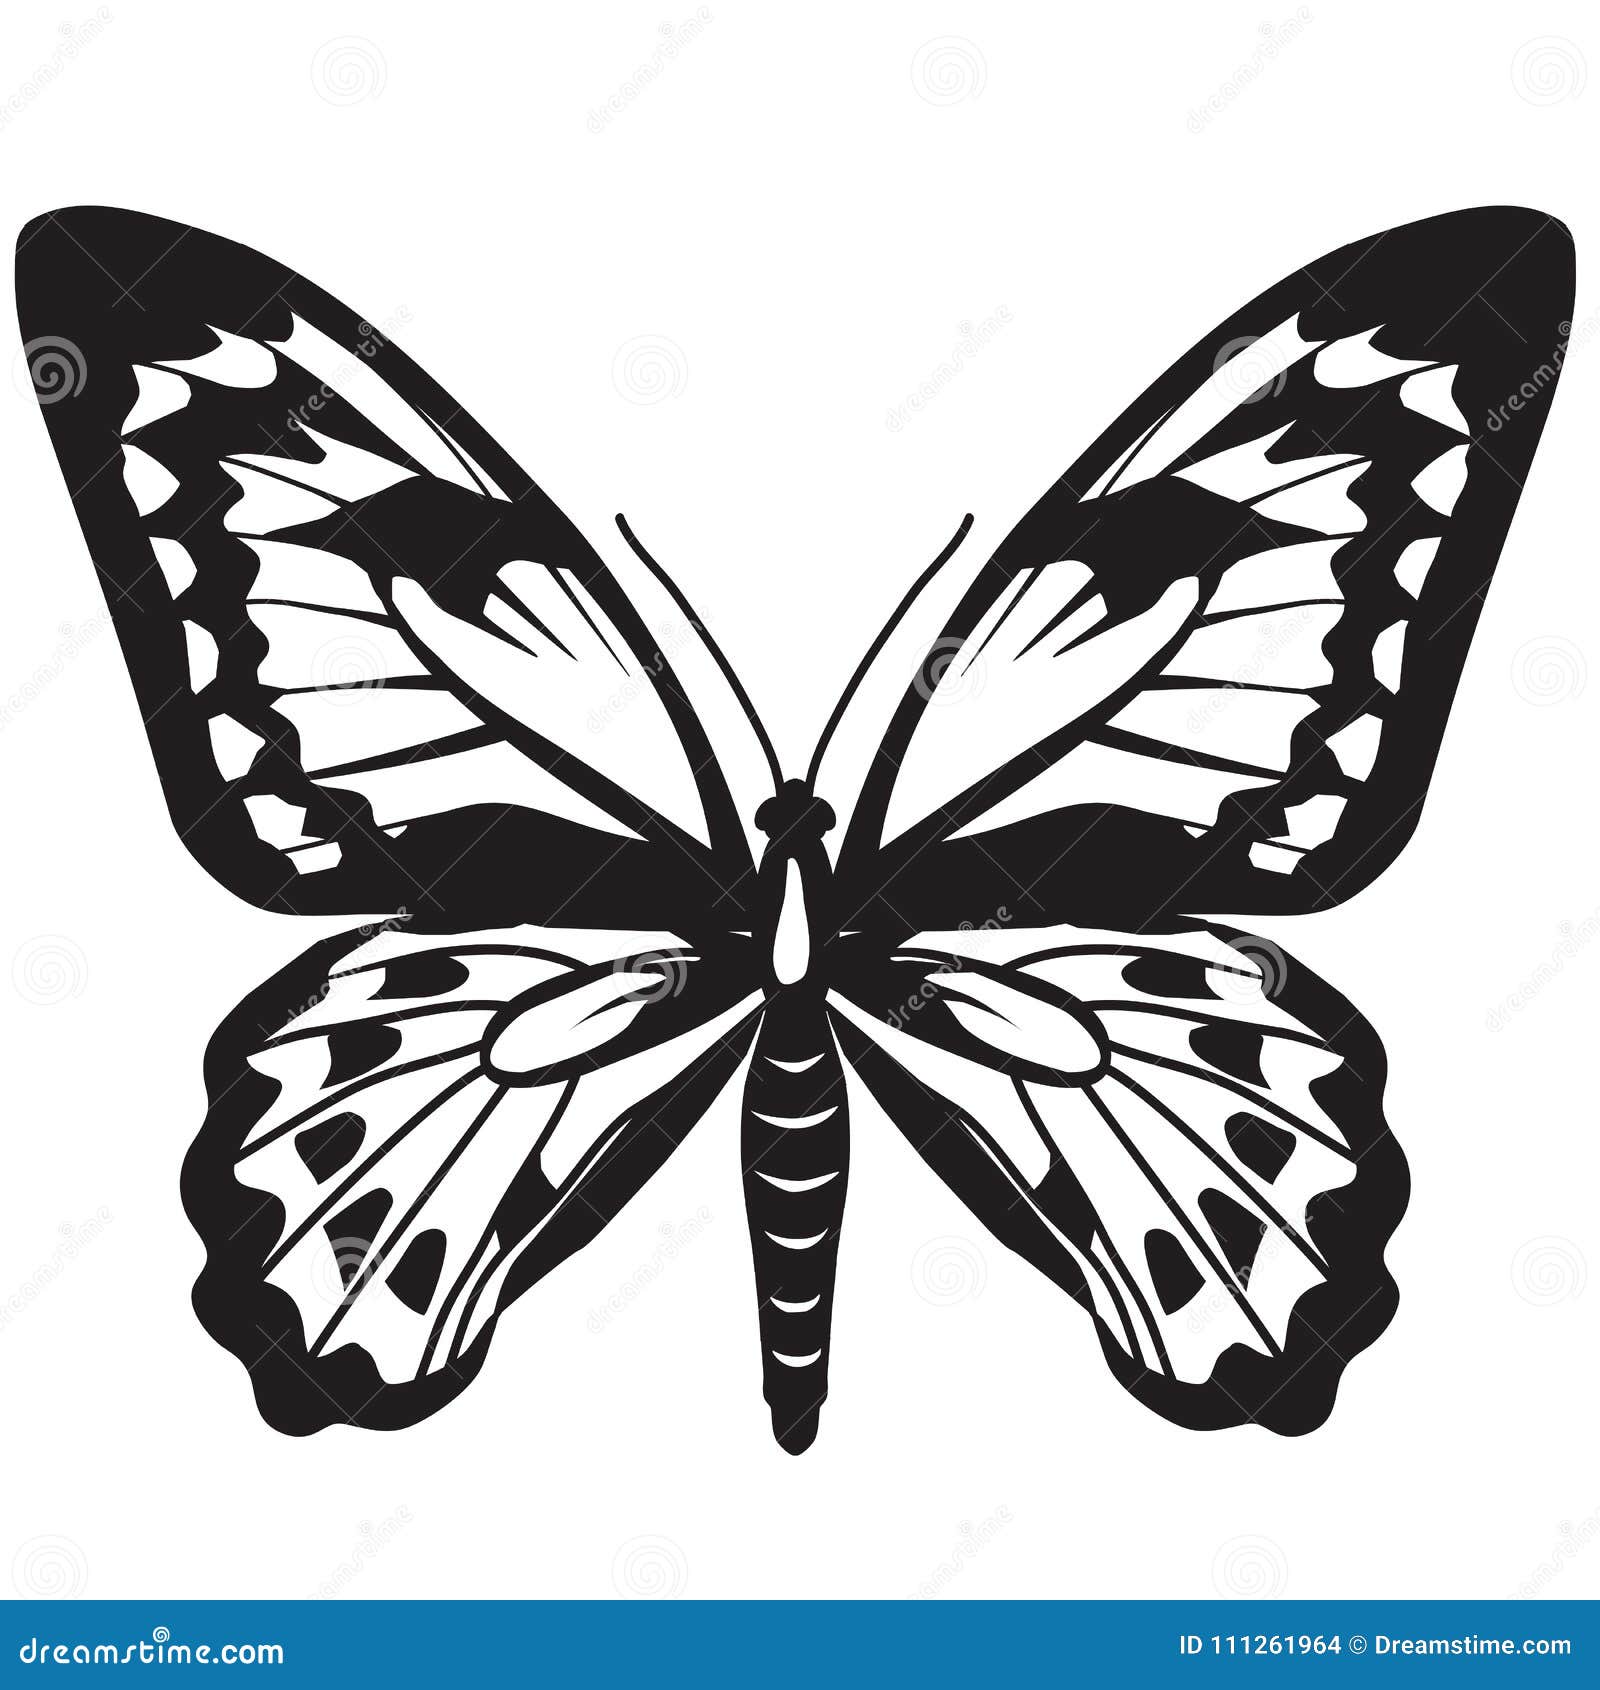 Download Cute Black Butterfly Vector Illustration Stock ...